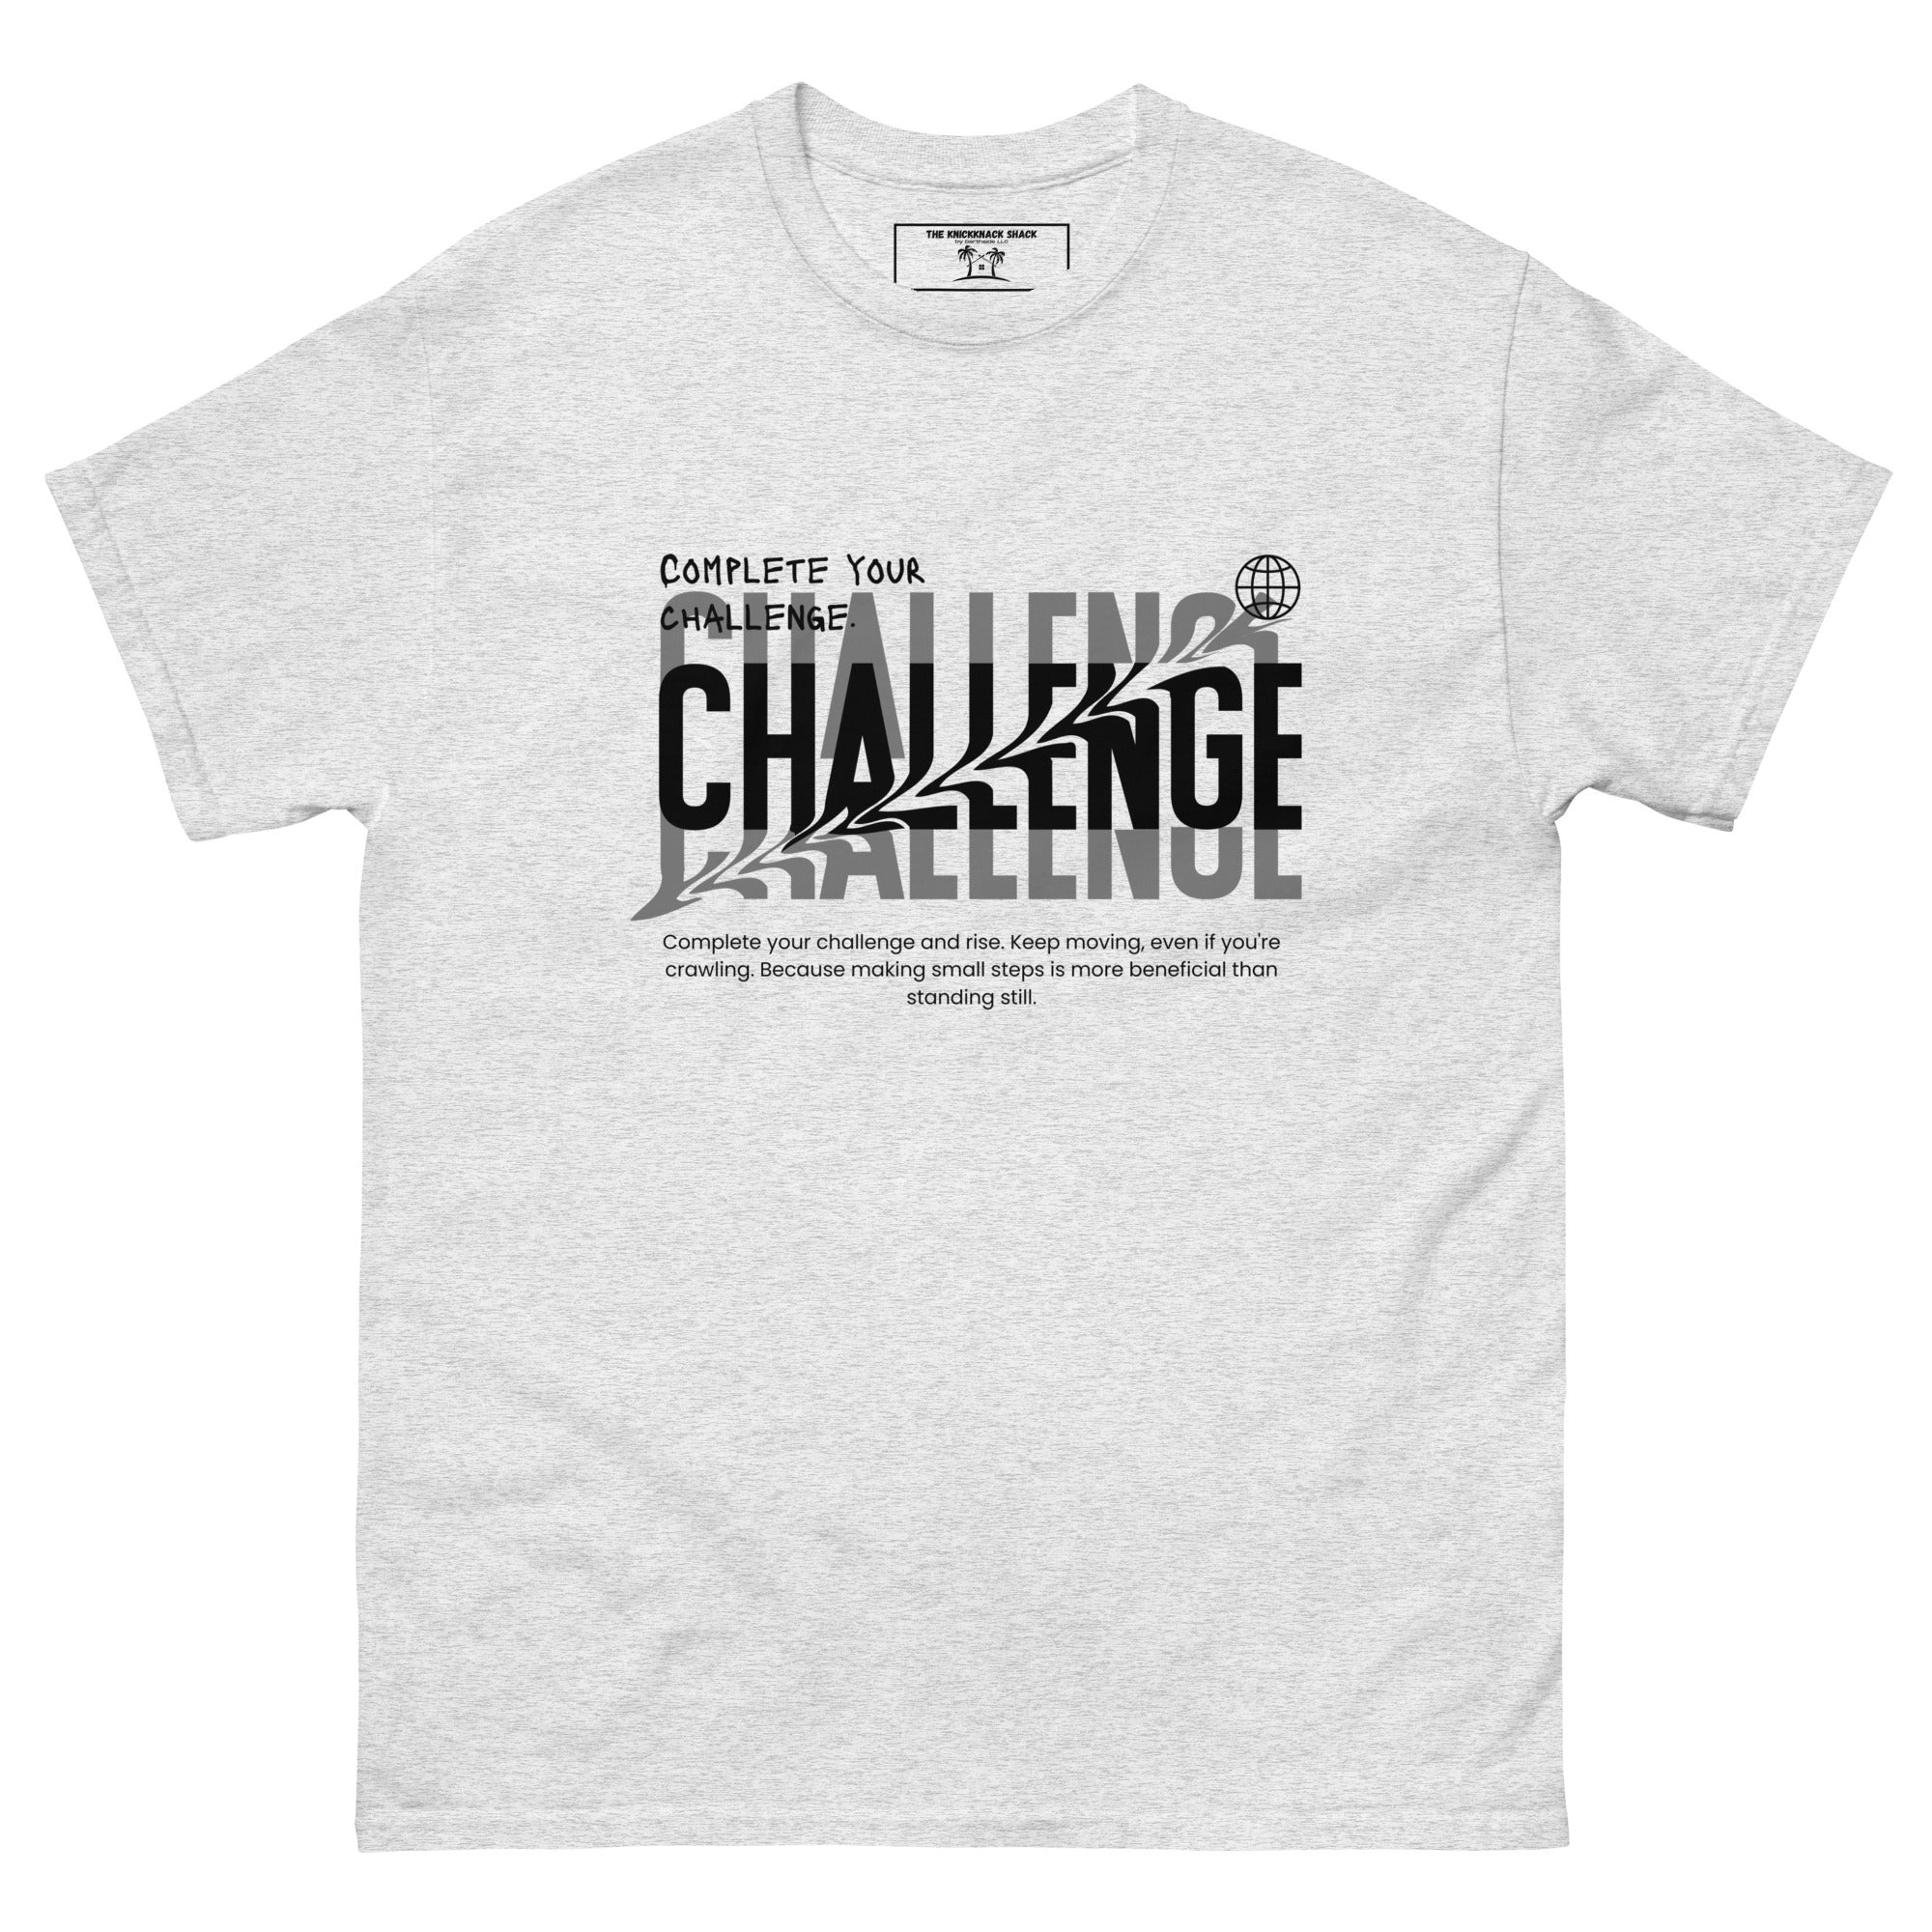 Classic Tee - Complete Your Challenge (Light Colors)